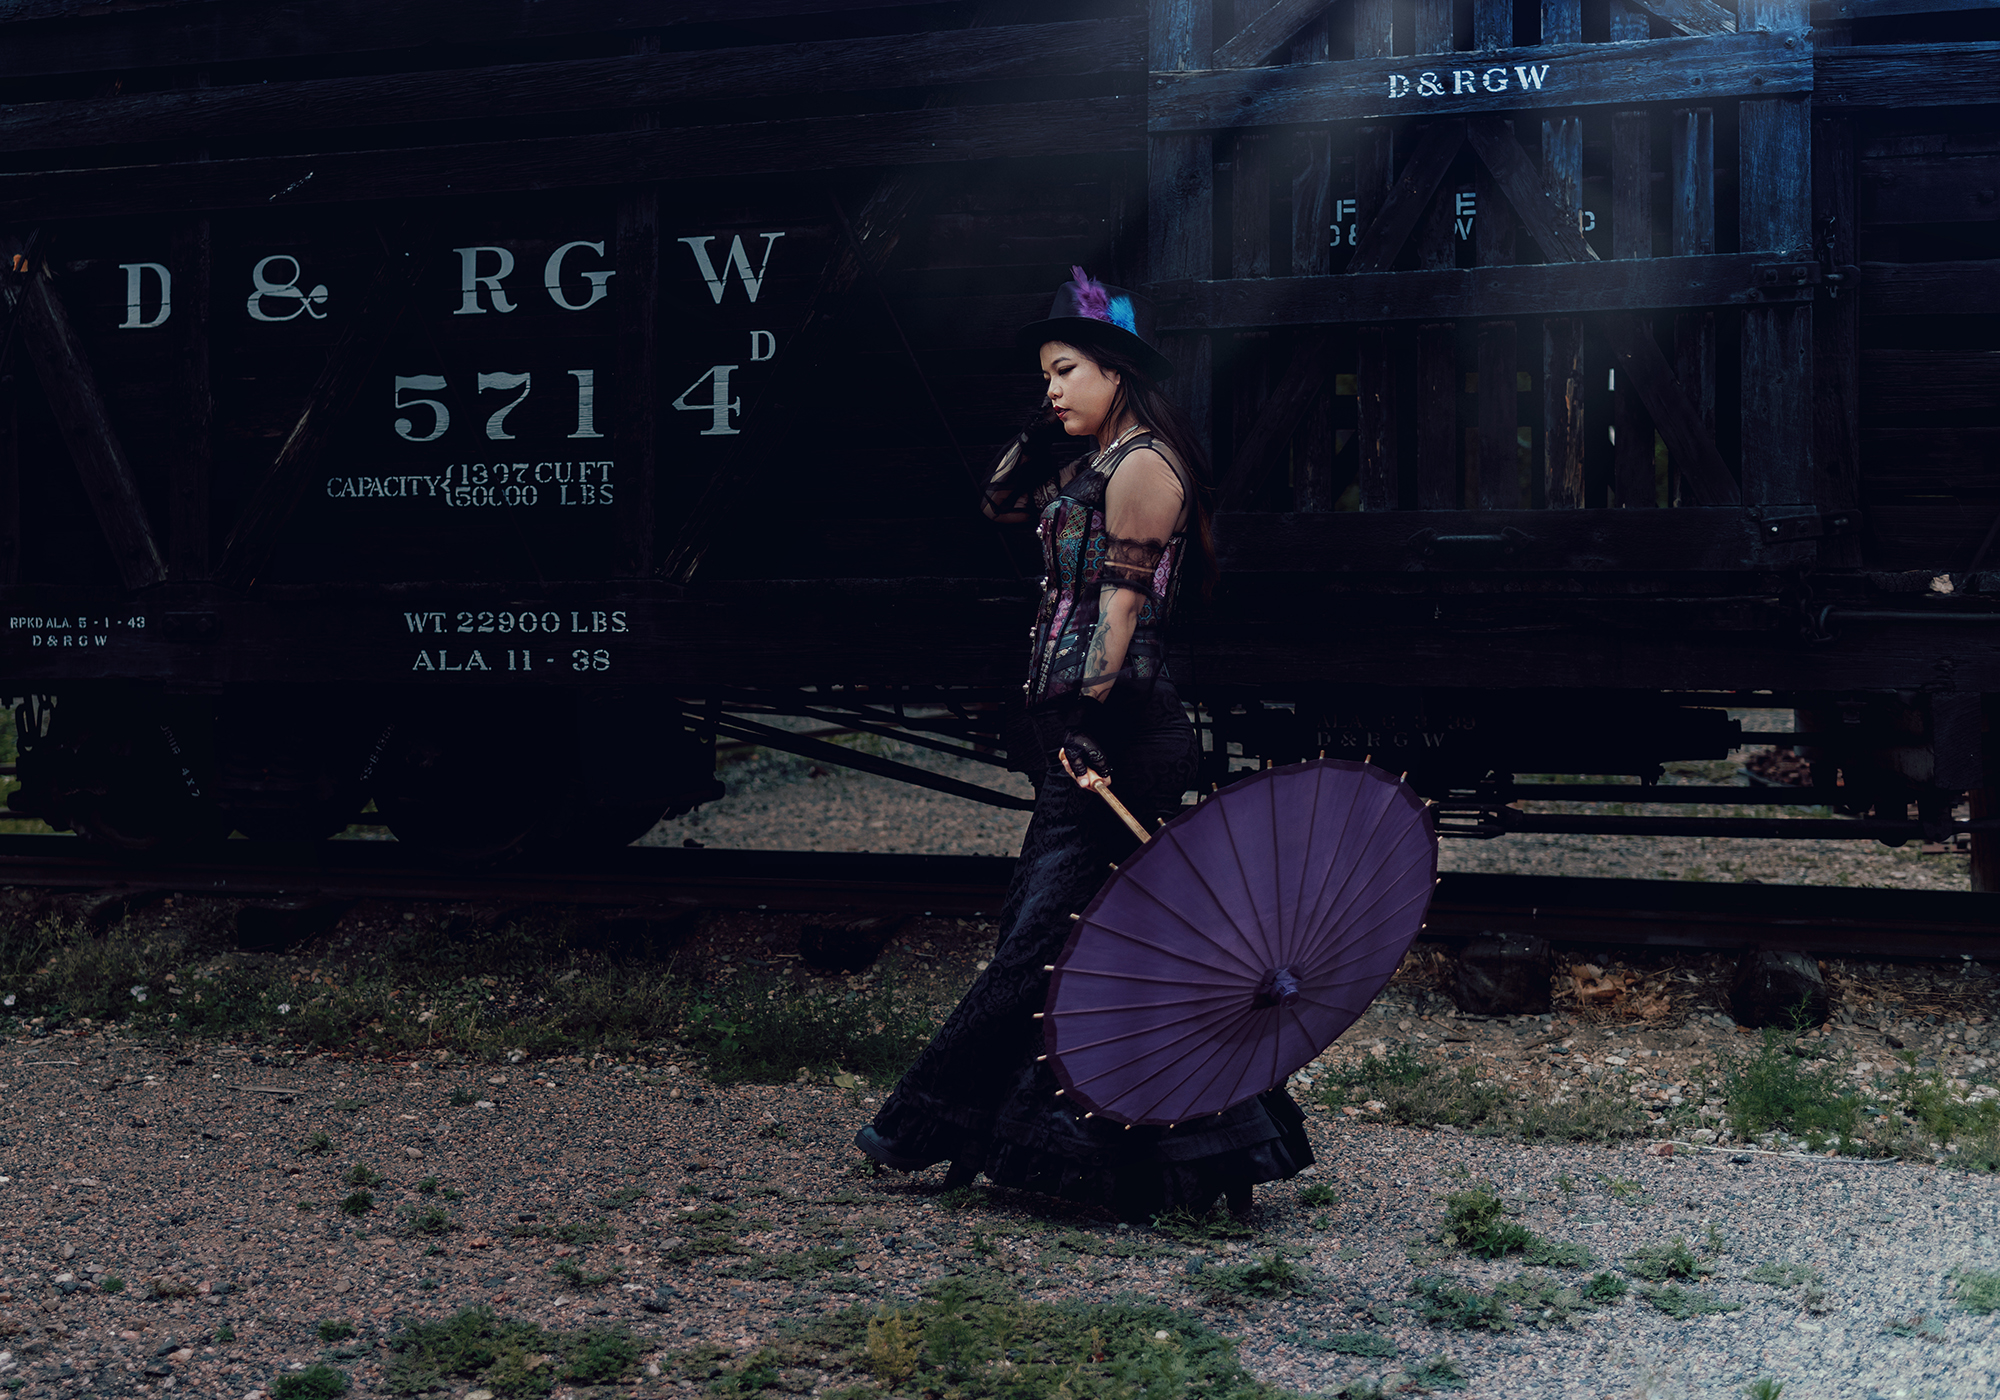 A fantasy photo of a woman walking next to a wooden train car in a Victorian style steampunk outfit holding a purple parasol